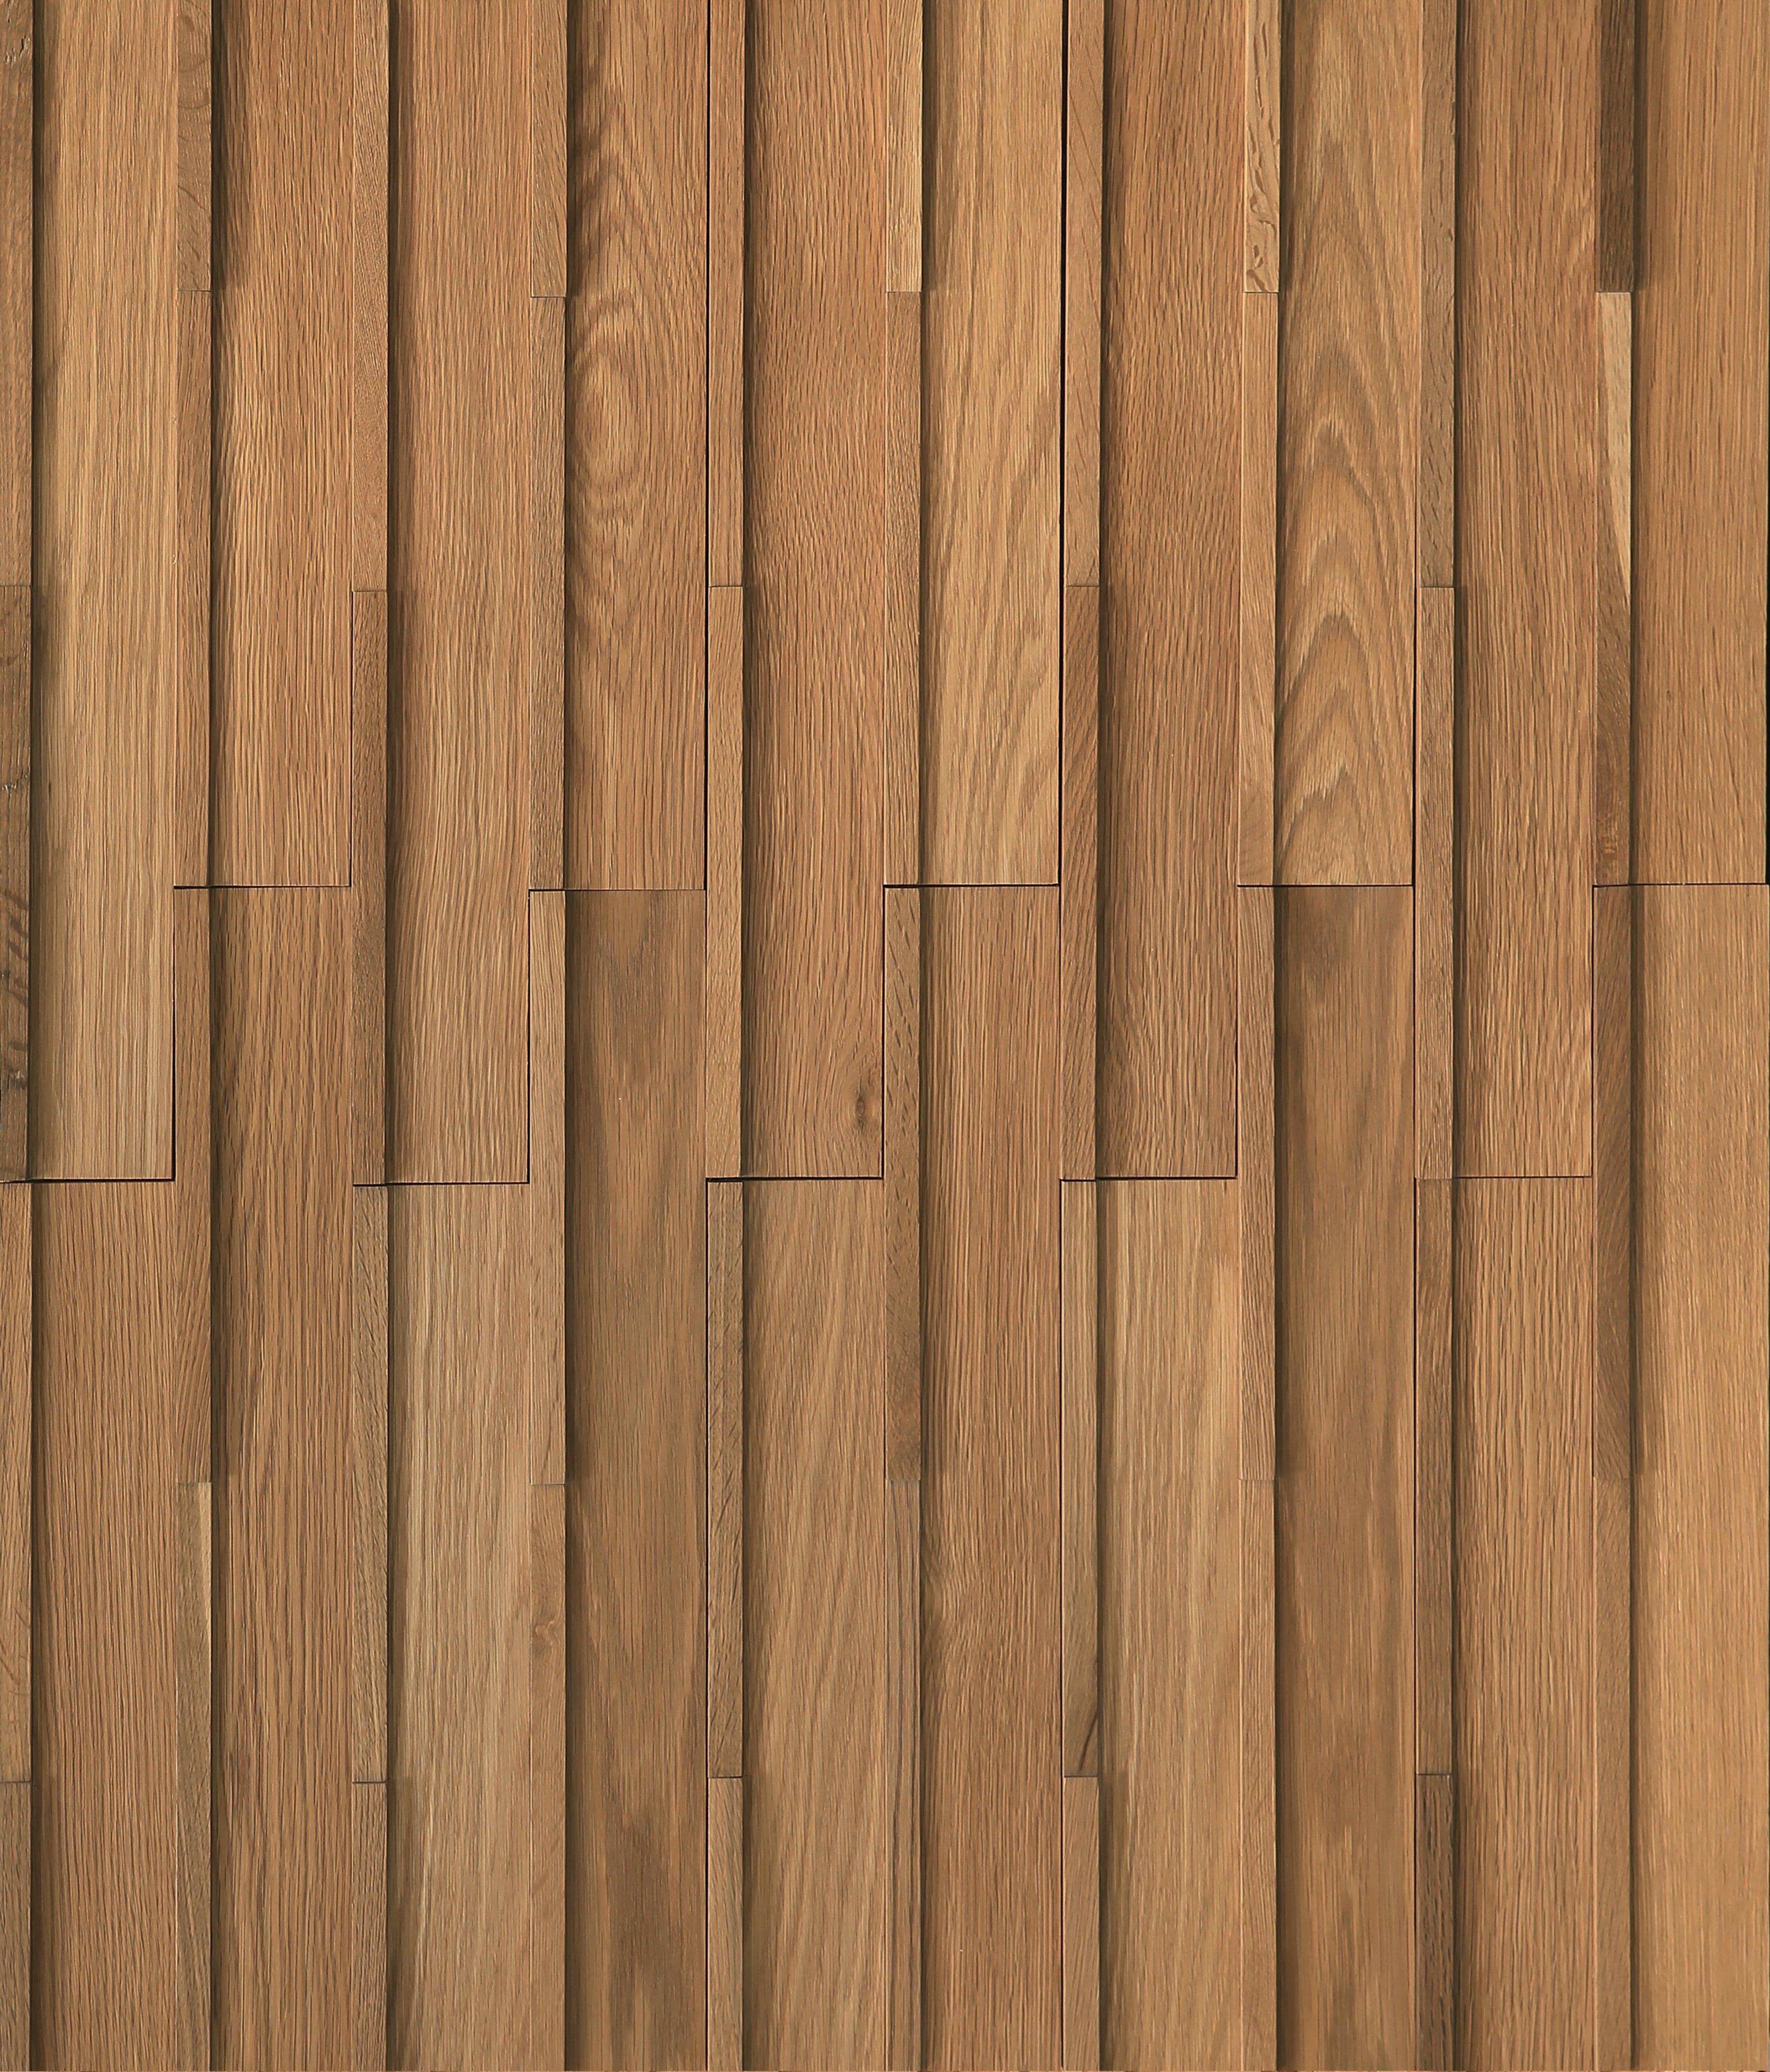 duchateau inceptiv kubik olde dutch oak three dimensional wall natural wood panel lacquer for interior use distributed by surface group international